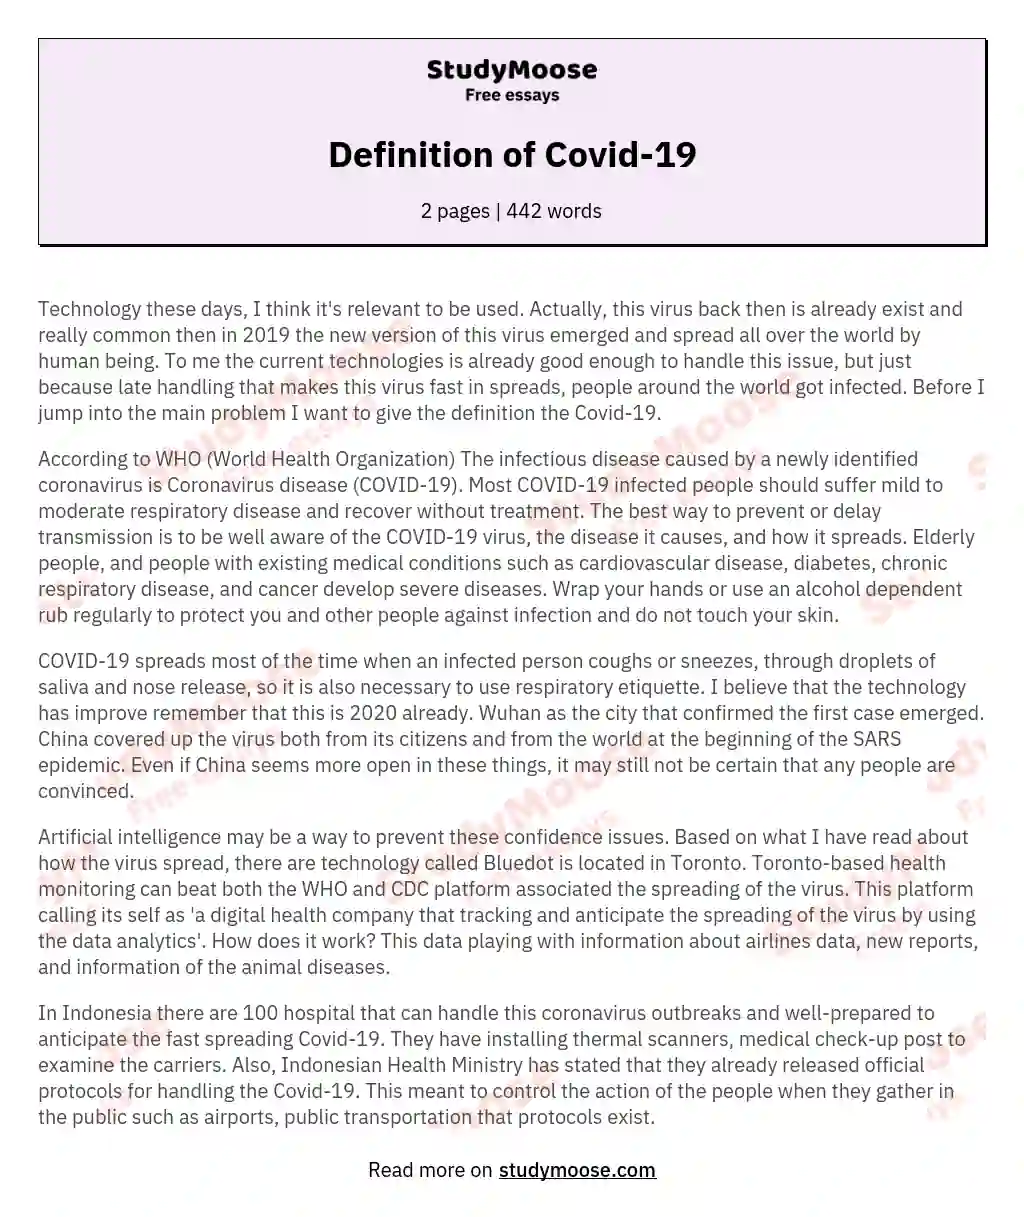 Definition of Covid-19